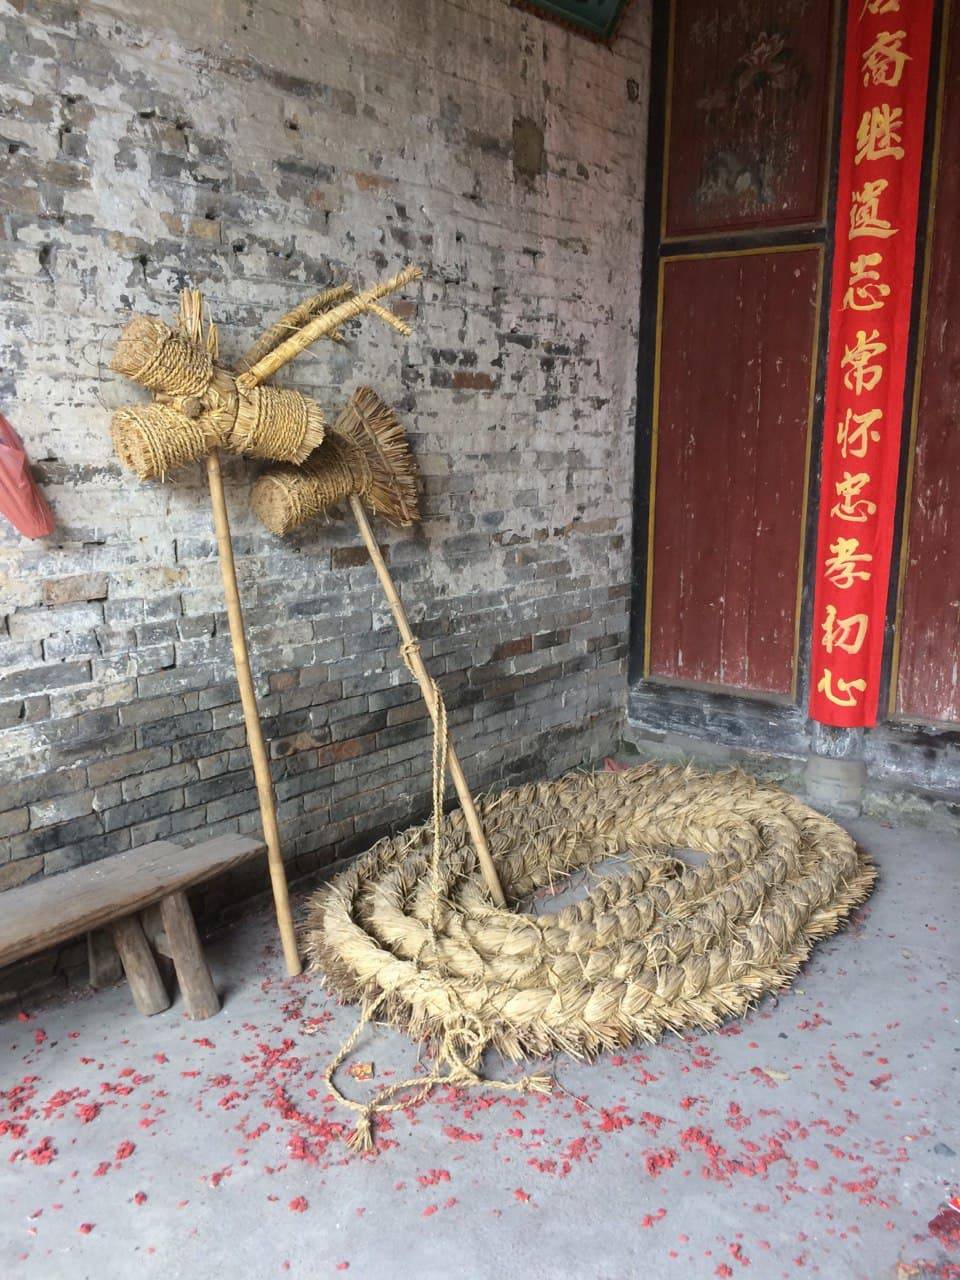 This is a dragon decoration made of straw, which village members used on New Years Day and dance with it. People use firecrackers to expel the evil spirits away then welcome good spirits.